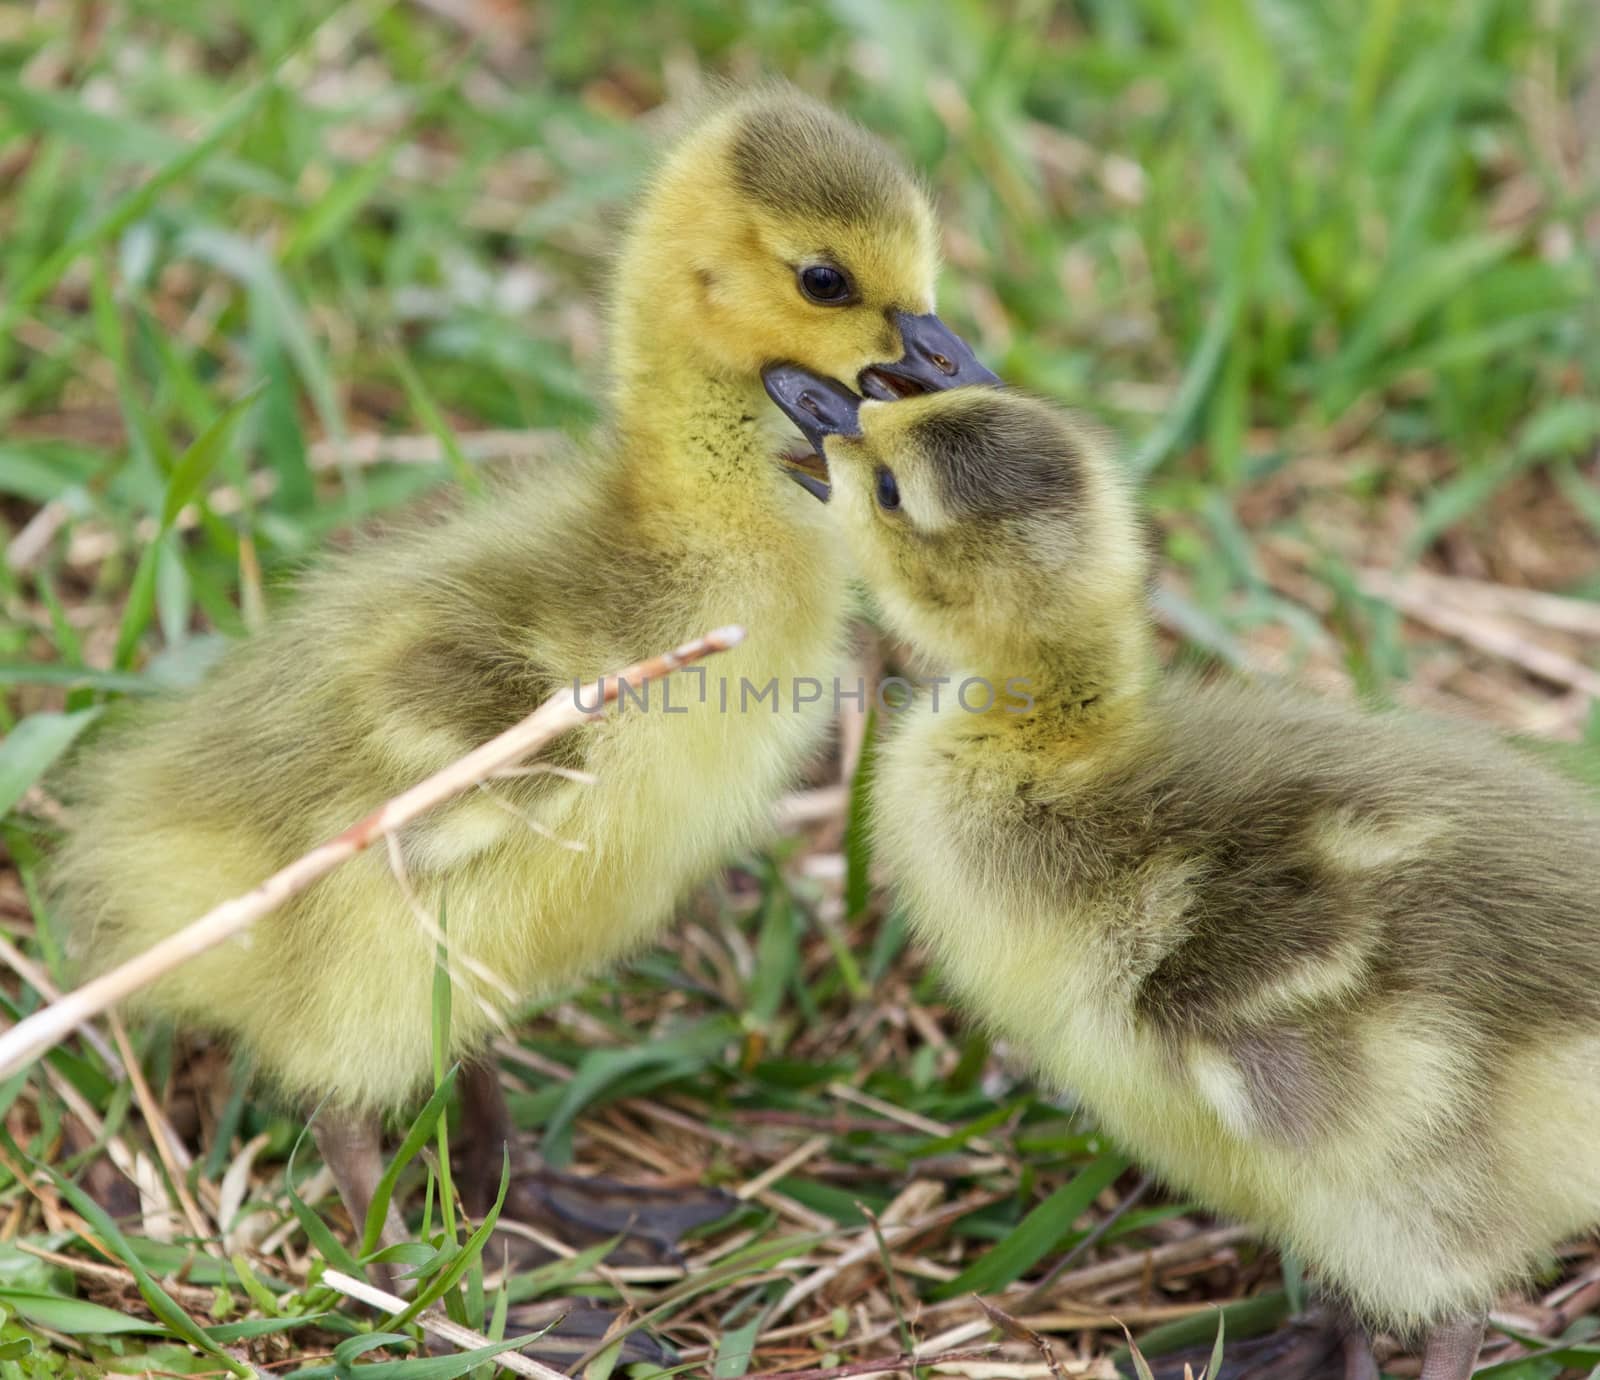 Funny beautiful image with two young cute chicks of the Canada geese in love